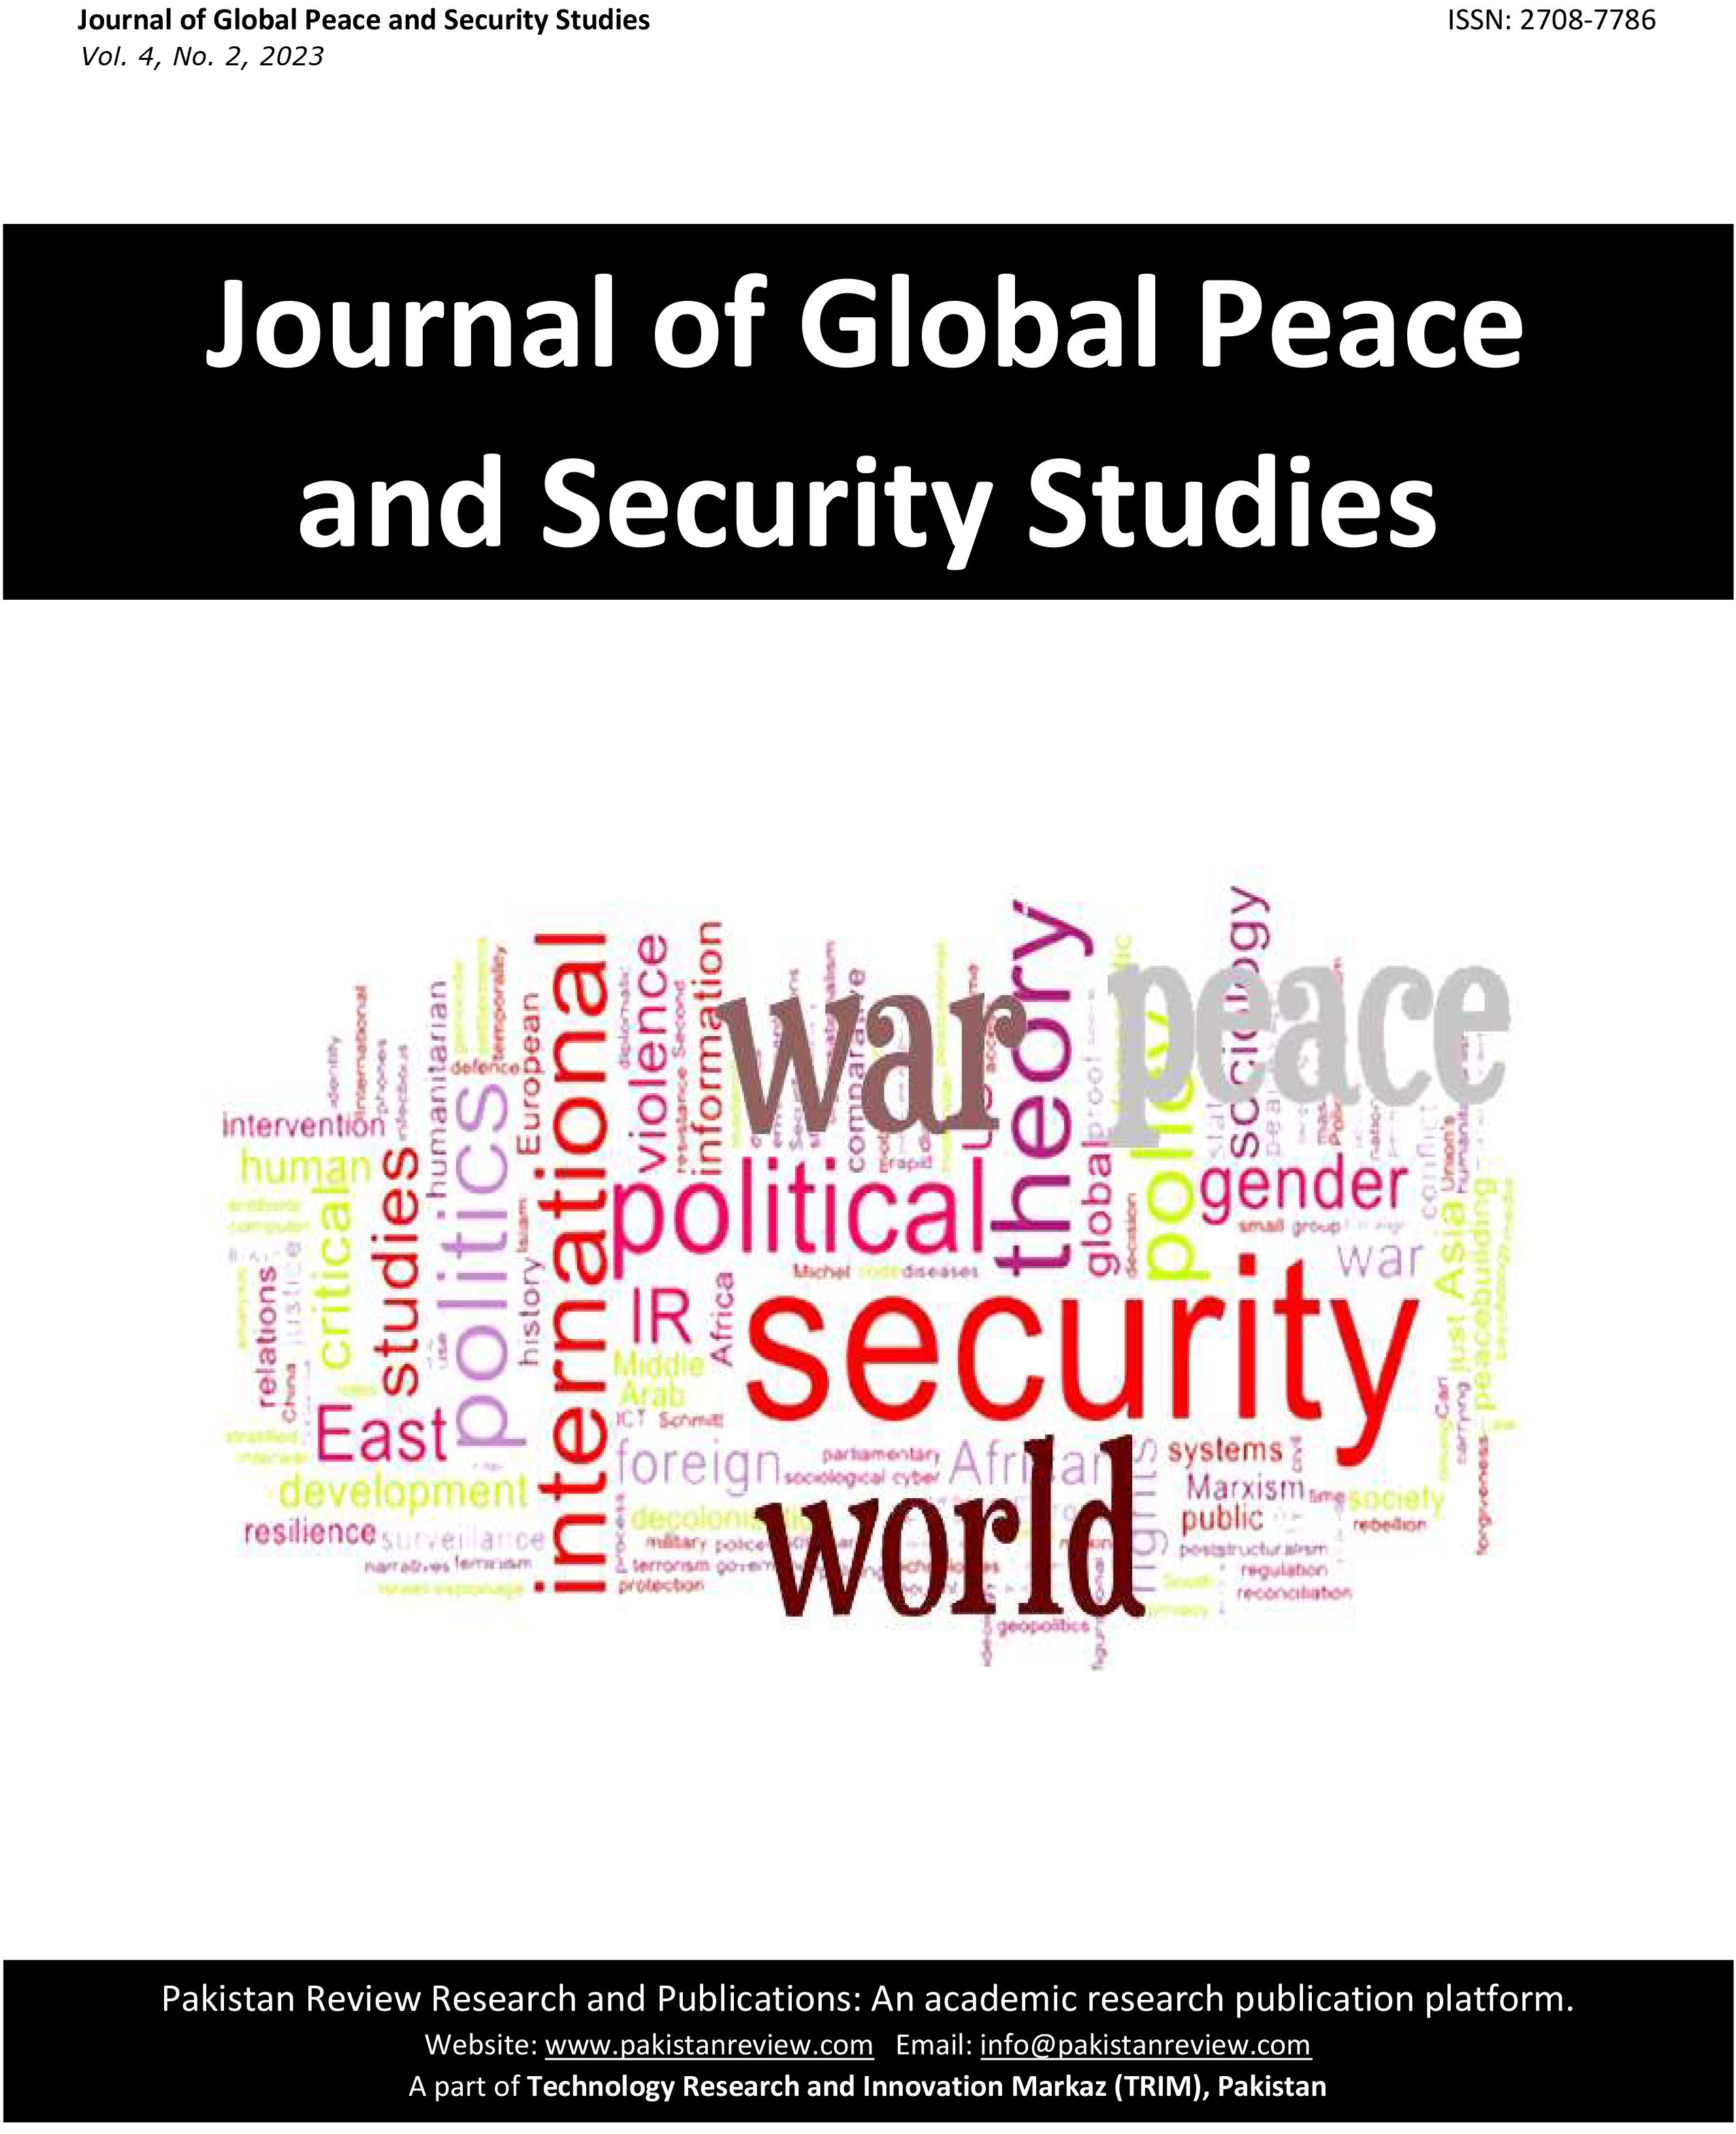 					View Vol. 4 No. 2 (2023): Journal of Global Peace and Security Studies (JGPSS)
				